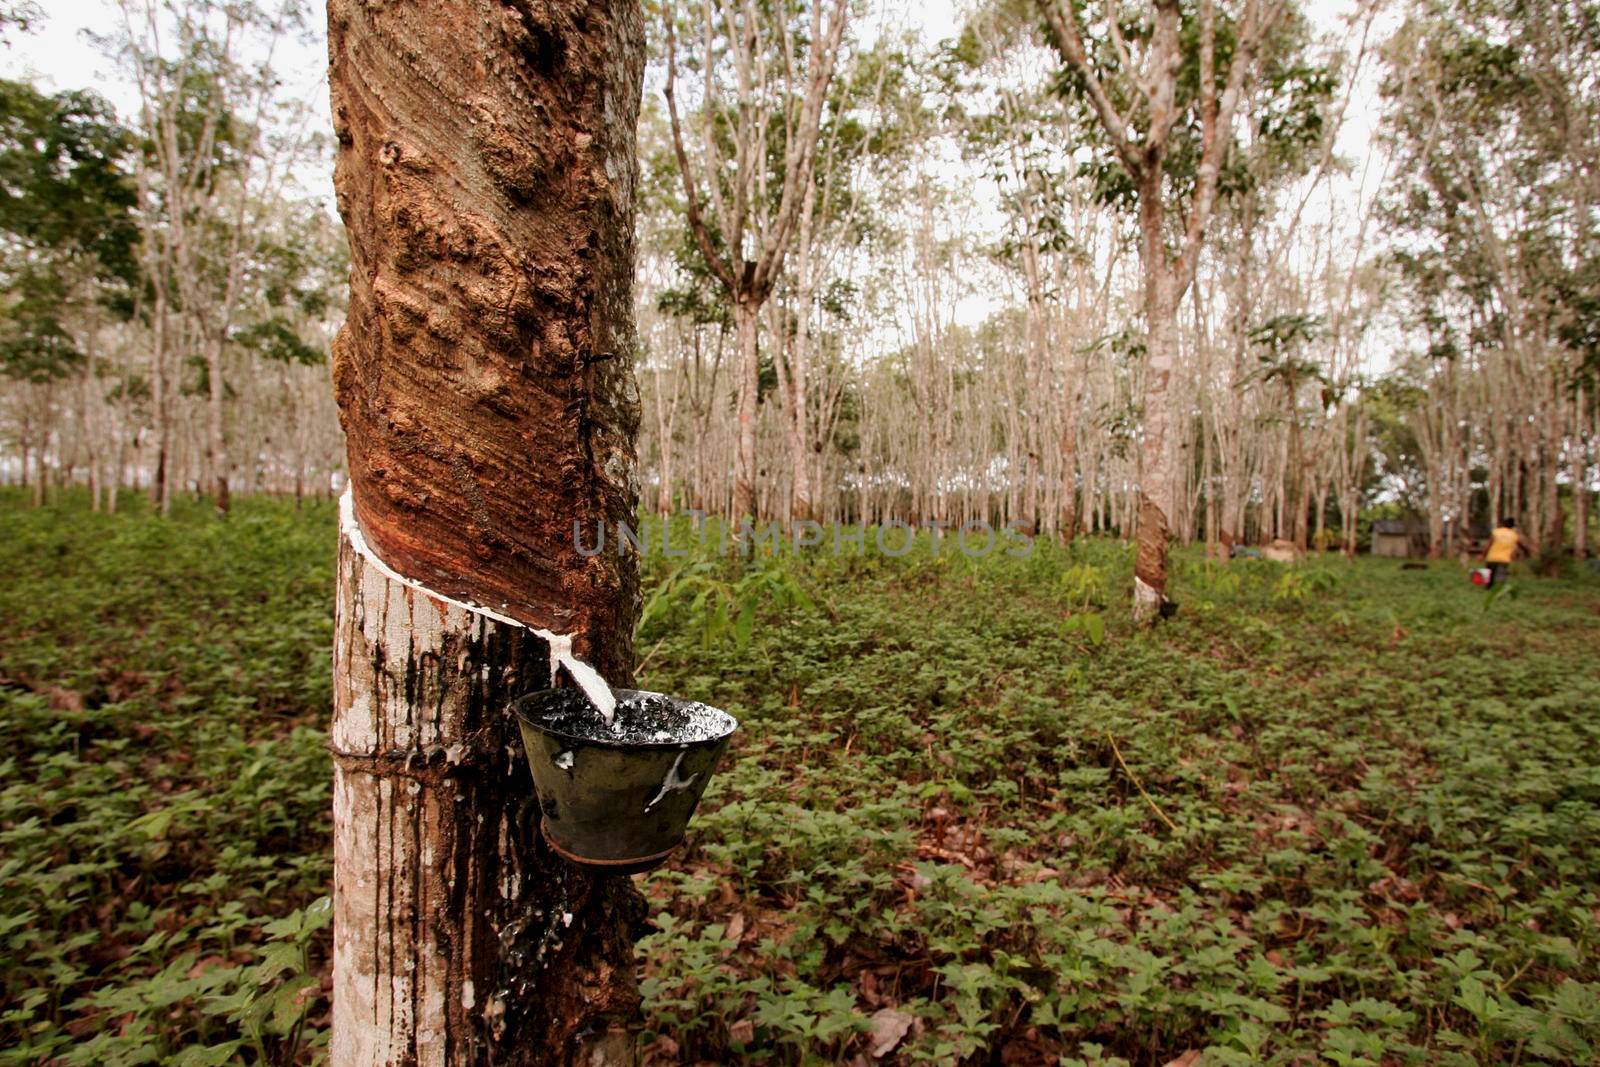 planting rubber trees for latex production by joasouza